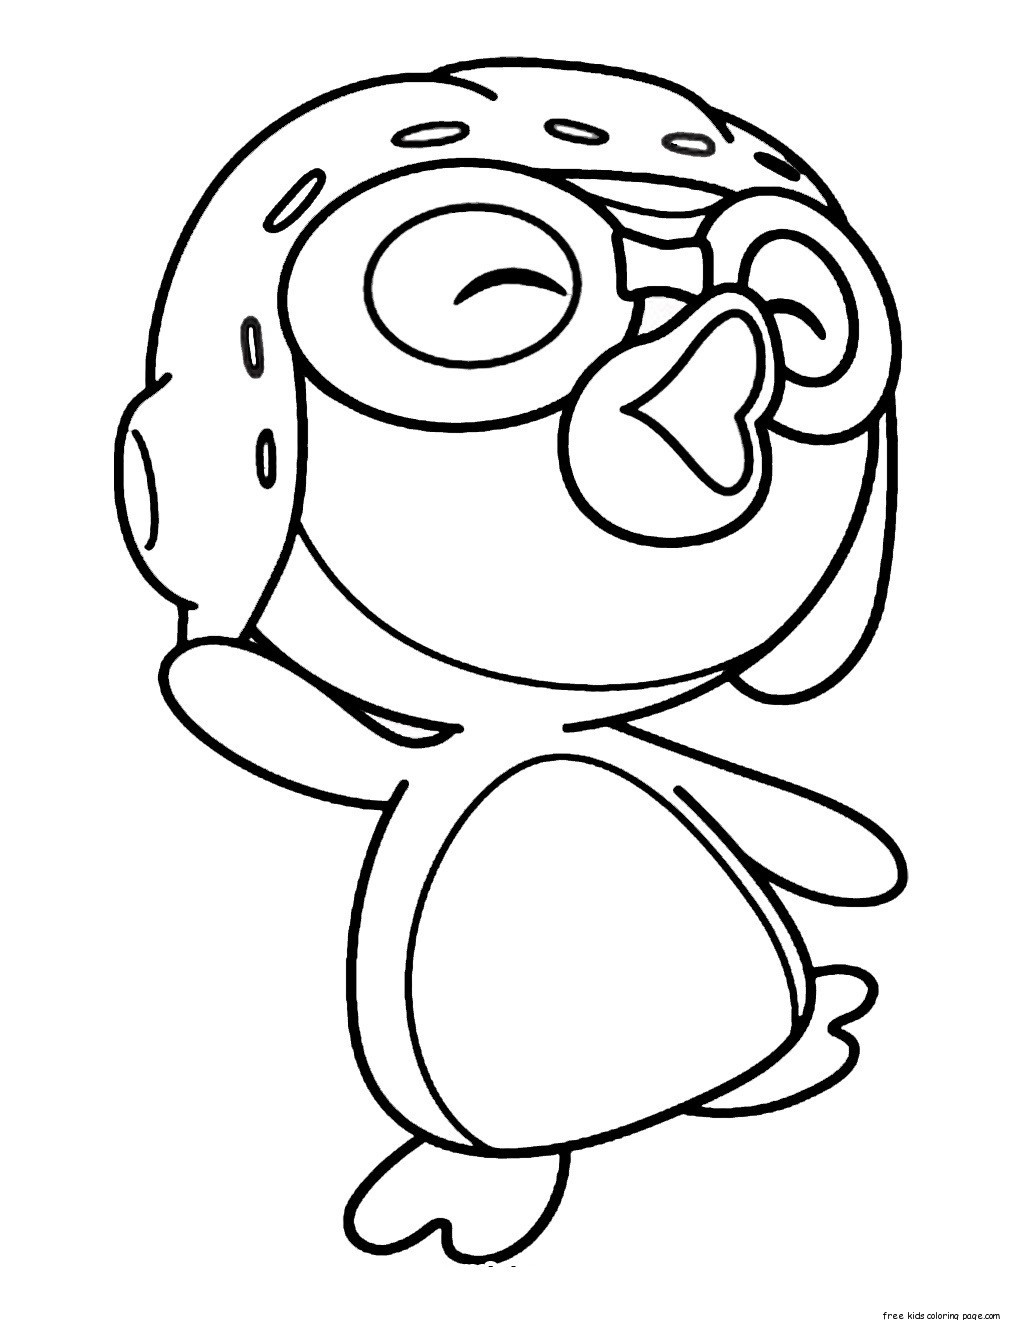 Coloring Pages For Toddlers To Print
 Printable pororo the little penguin coloring pages for